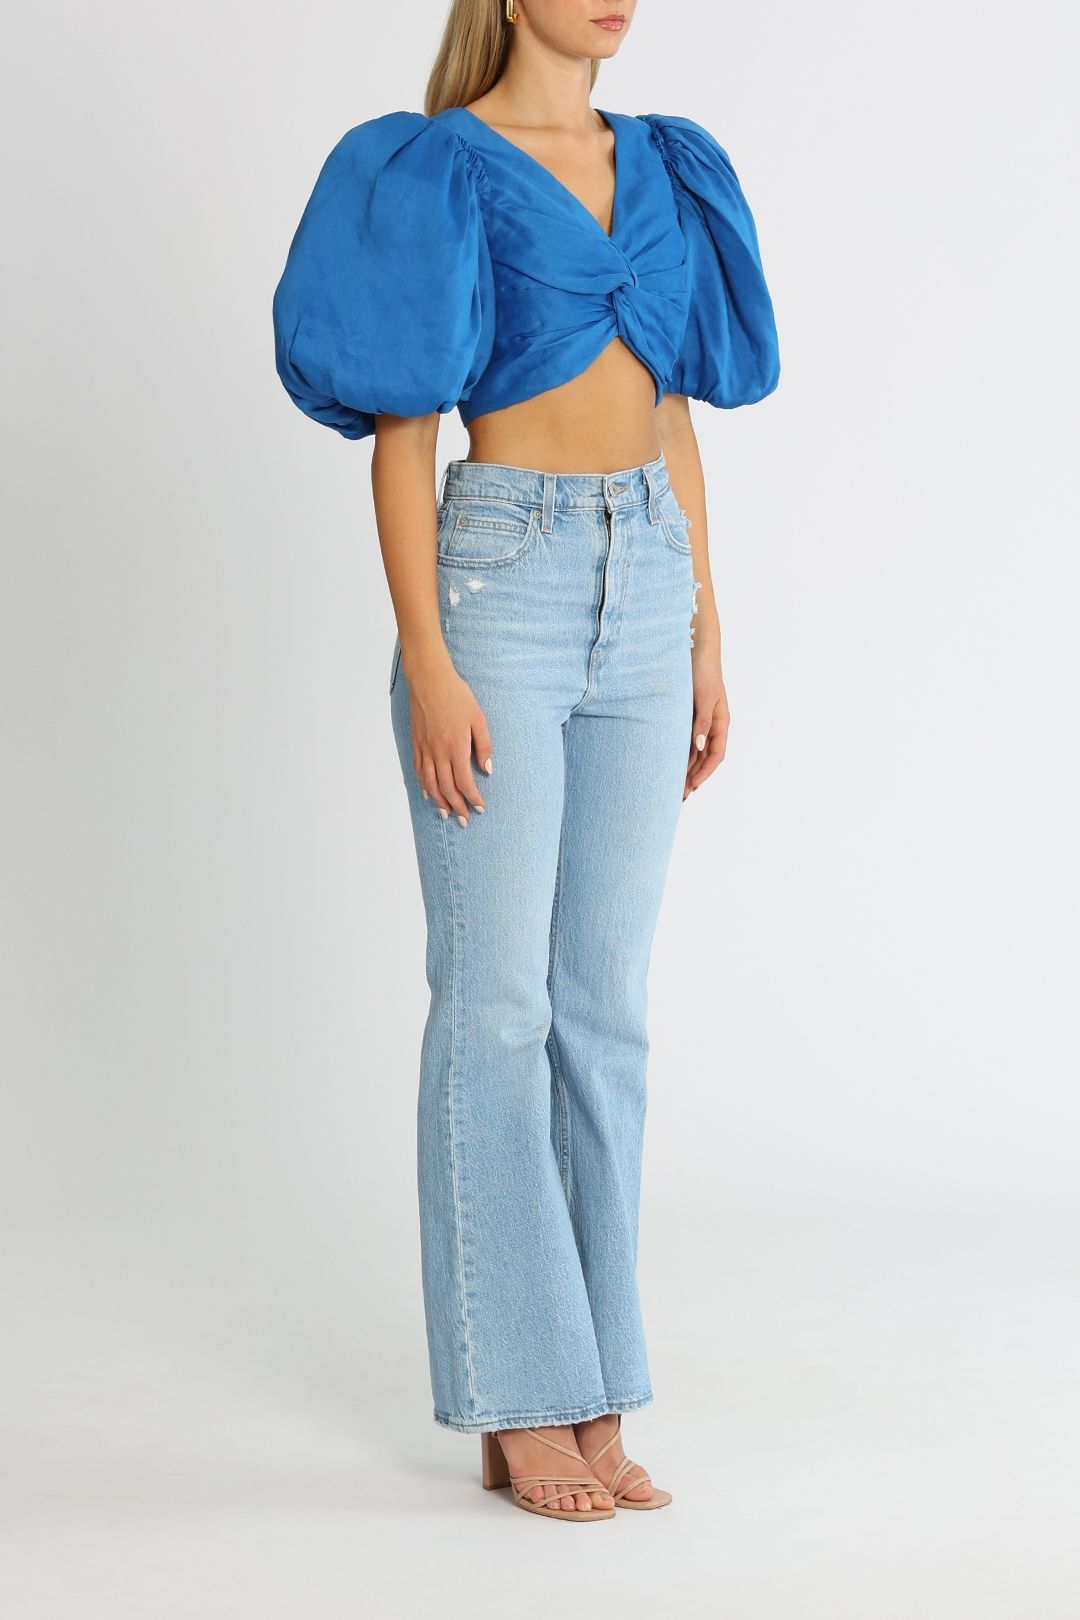 AJE Reverb Puff Sleeve Cropped Top Cobalt Blue Front Twist Detail